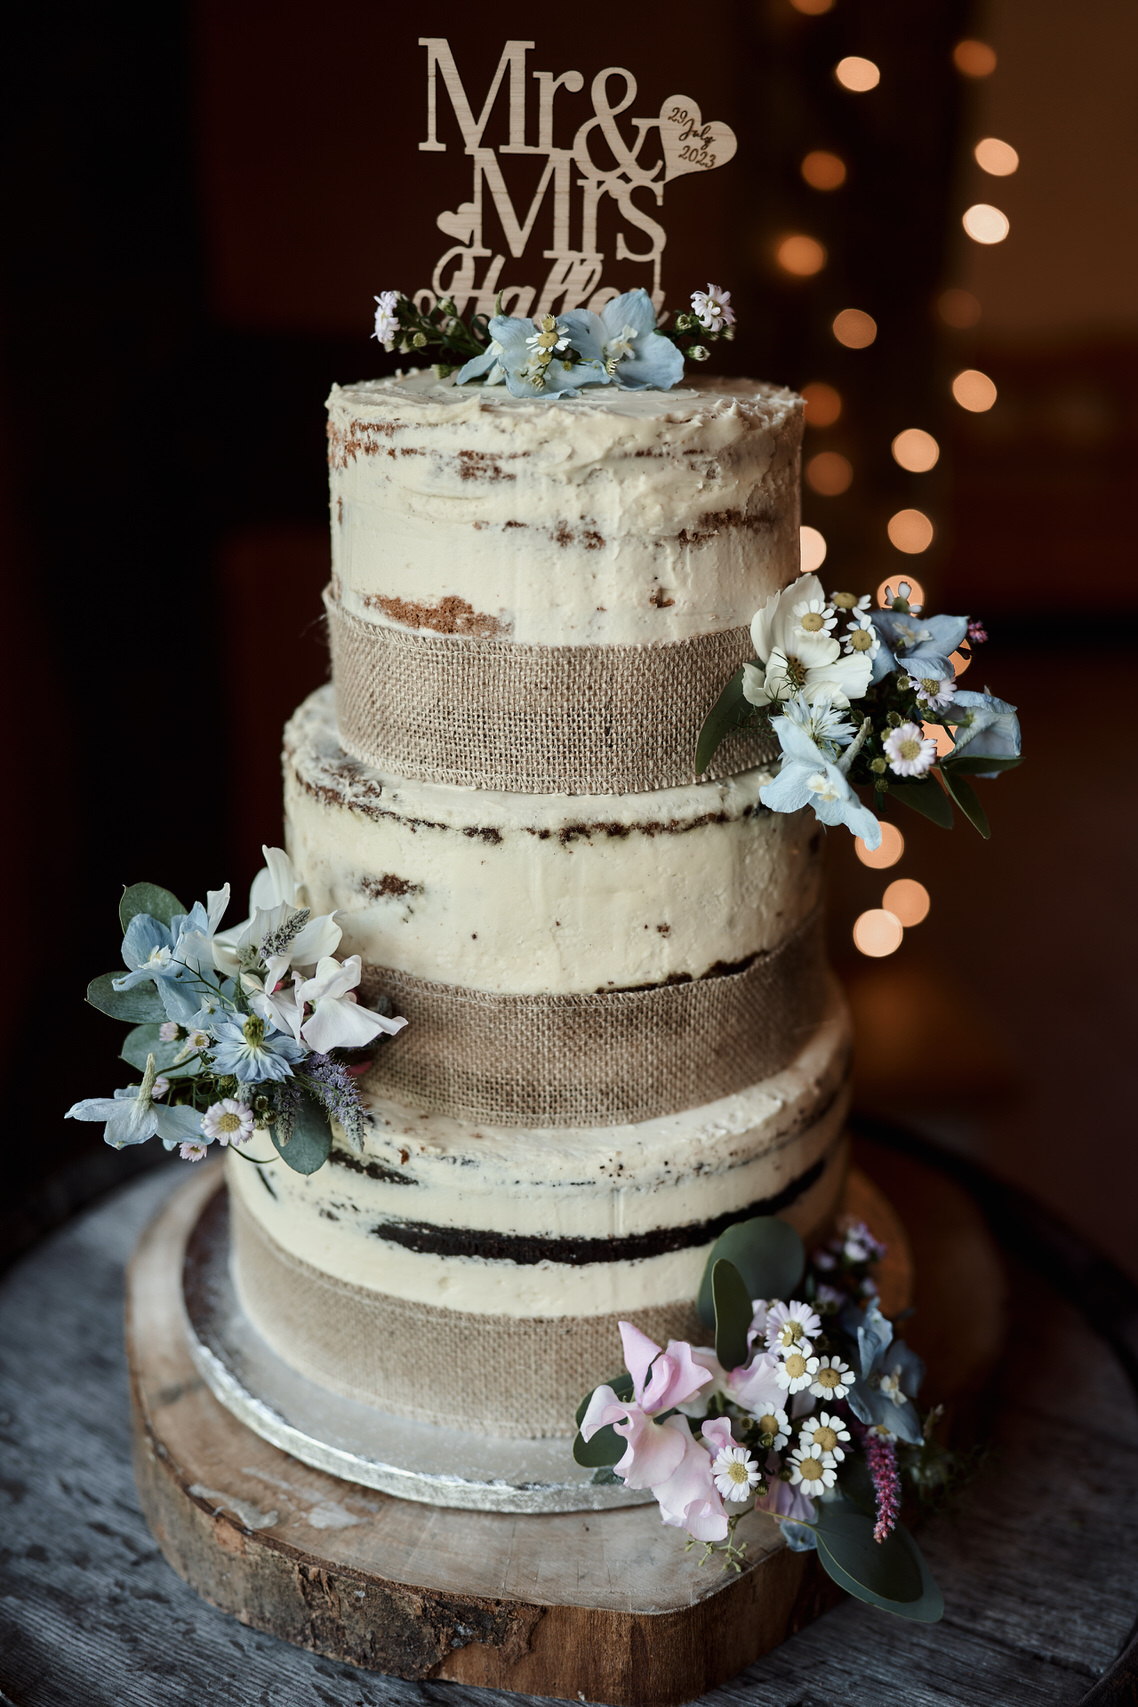 A wedding cake that has a bride and groom decoration on top.